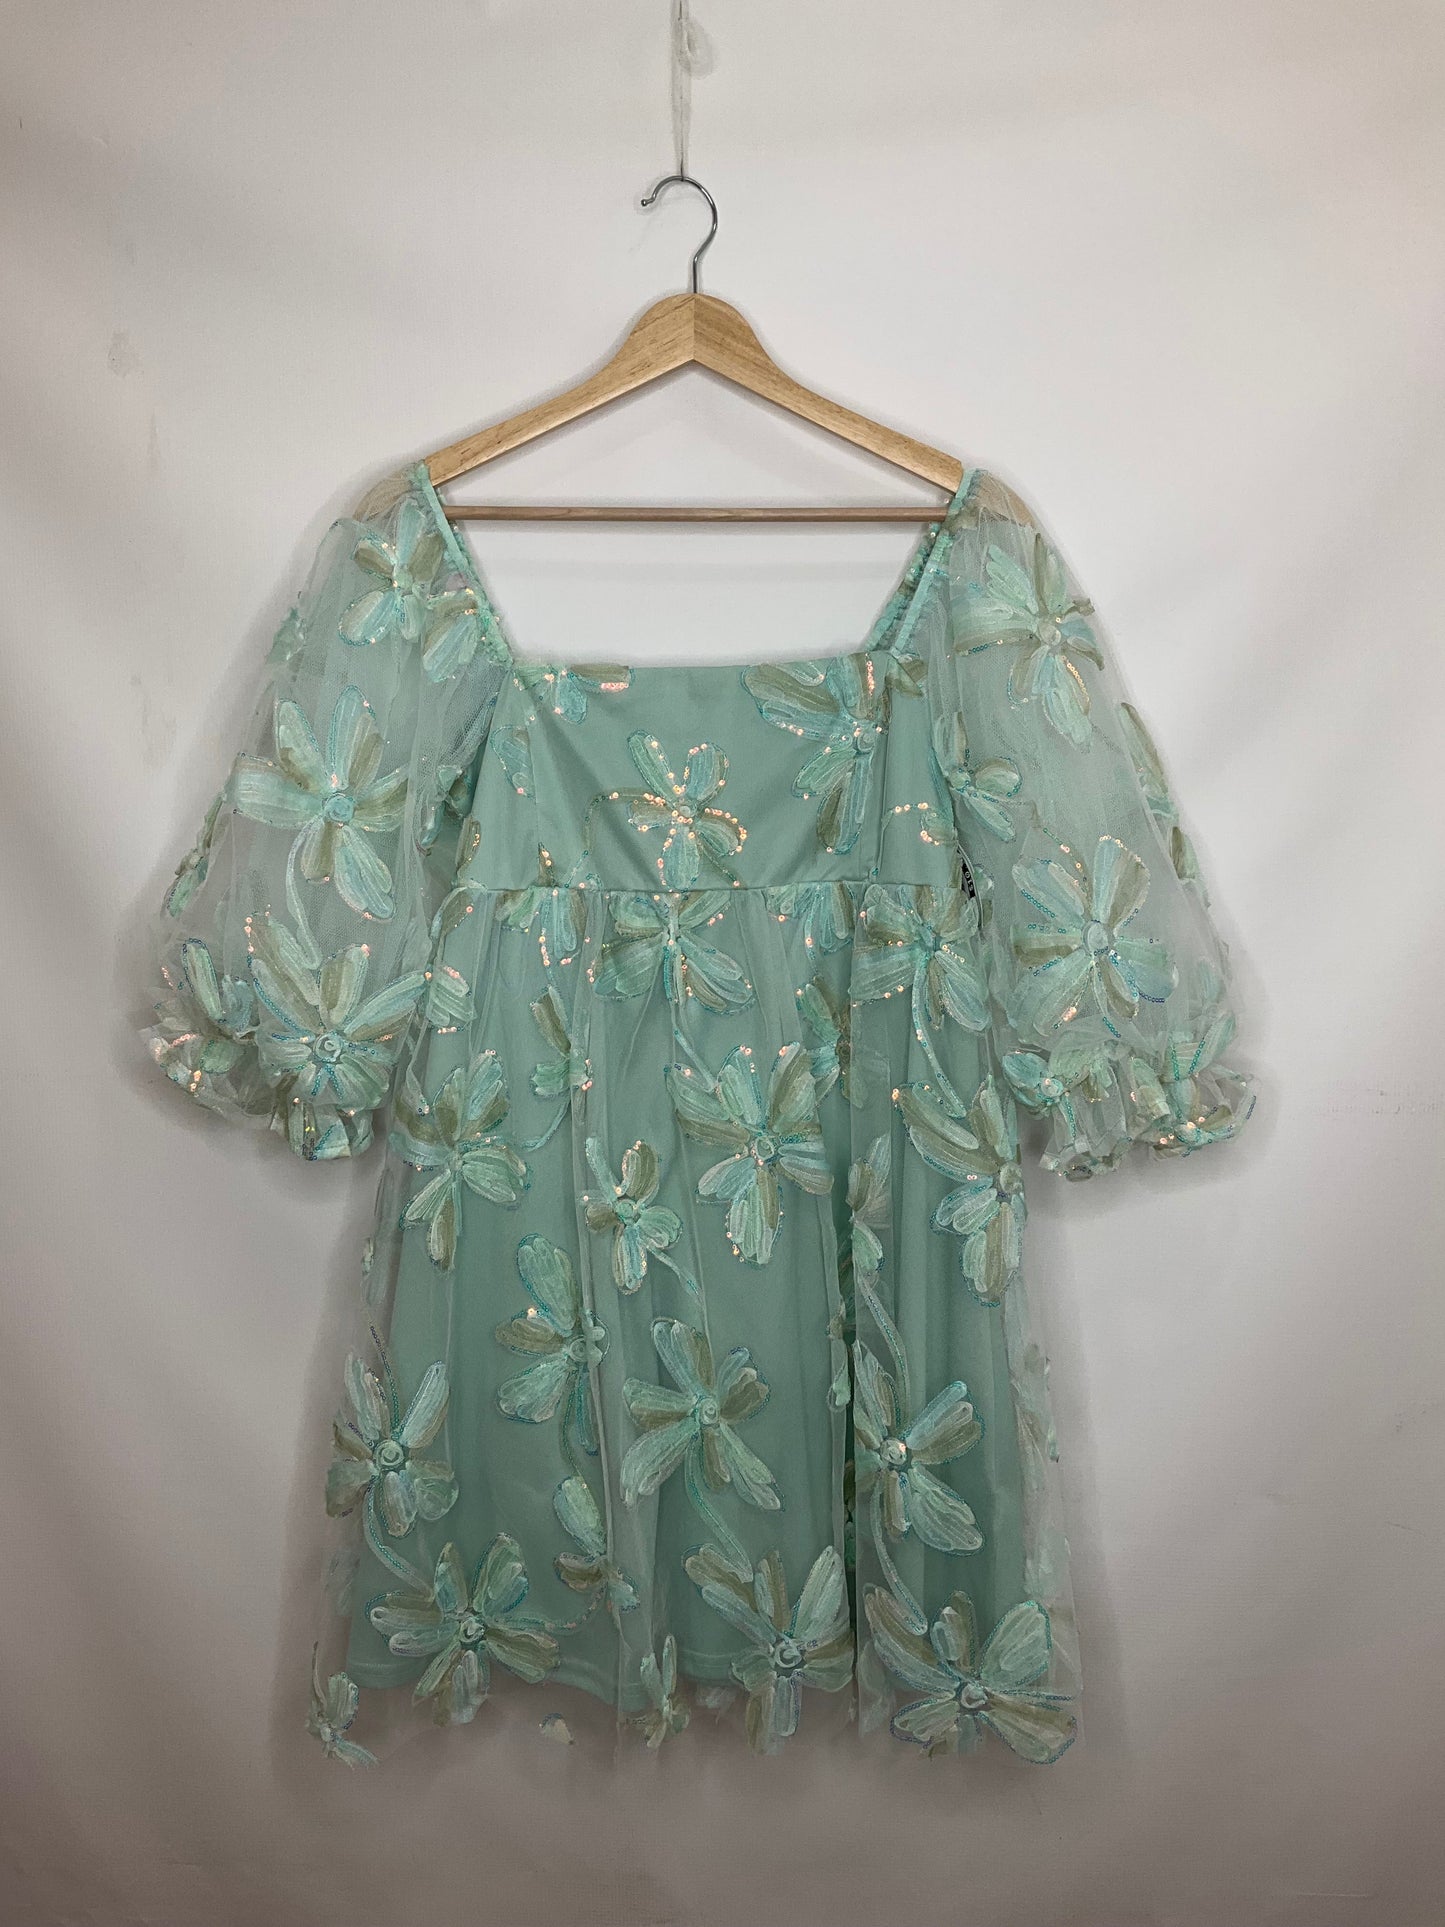 Teal Dress Casual Short Clothes Mentor, Size S